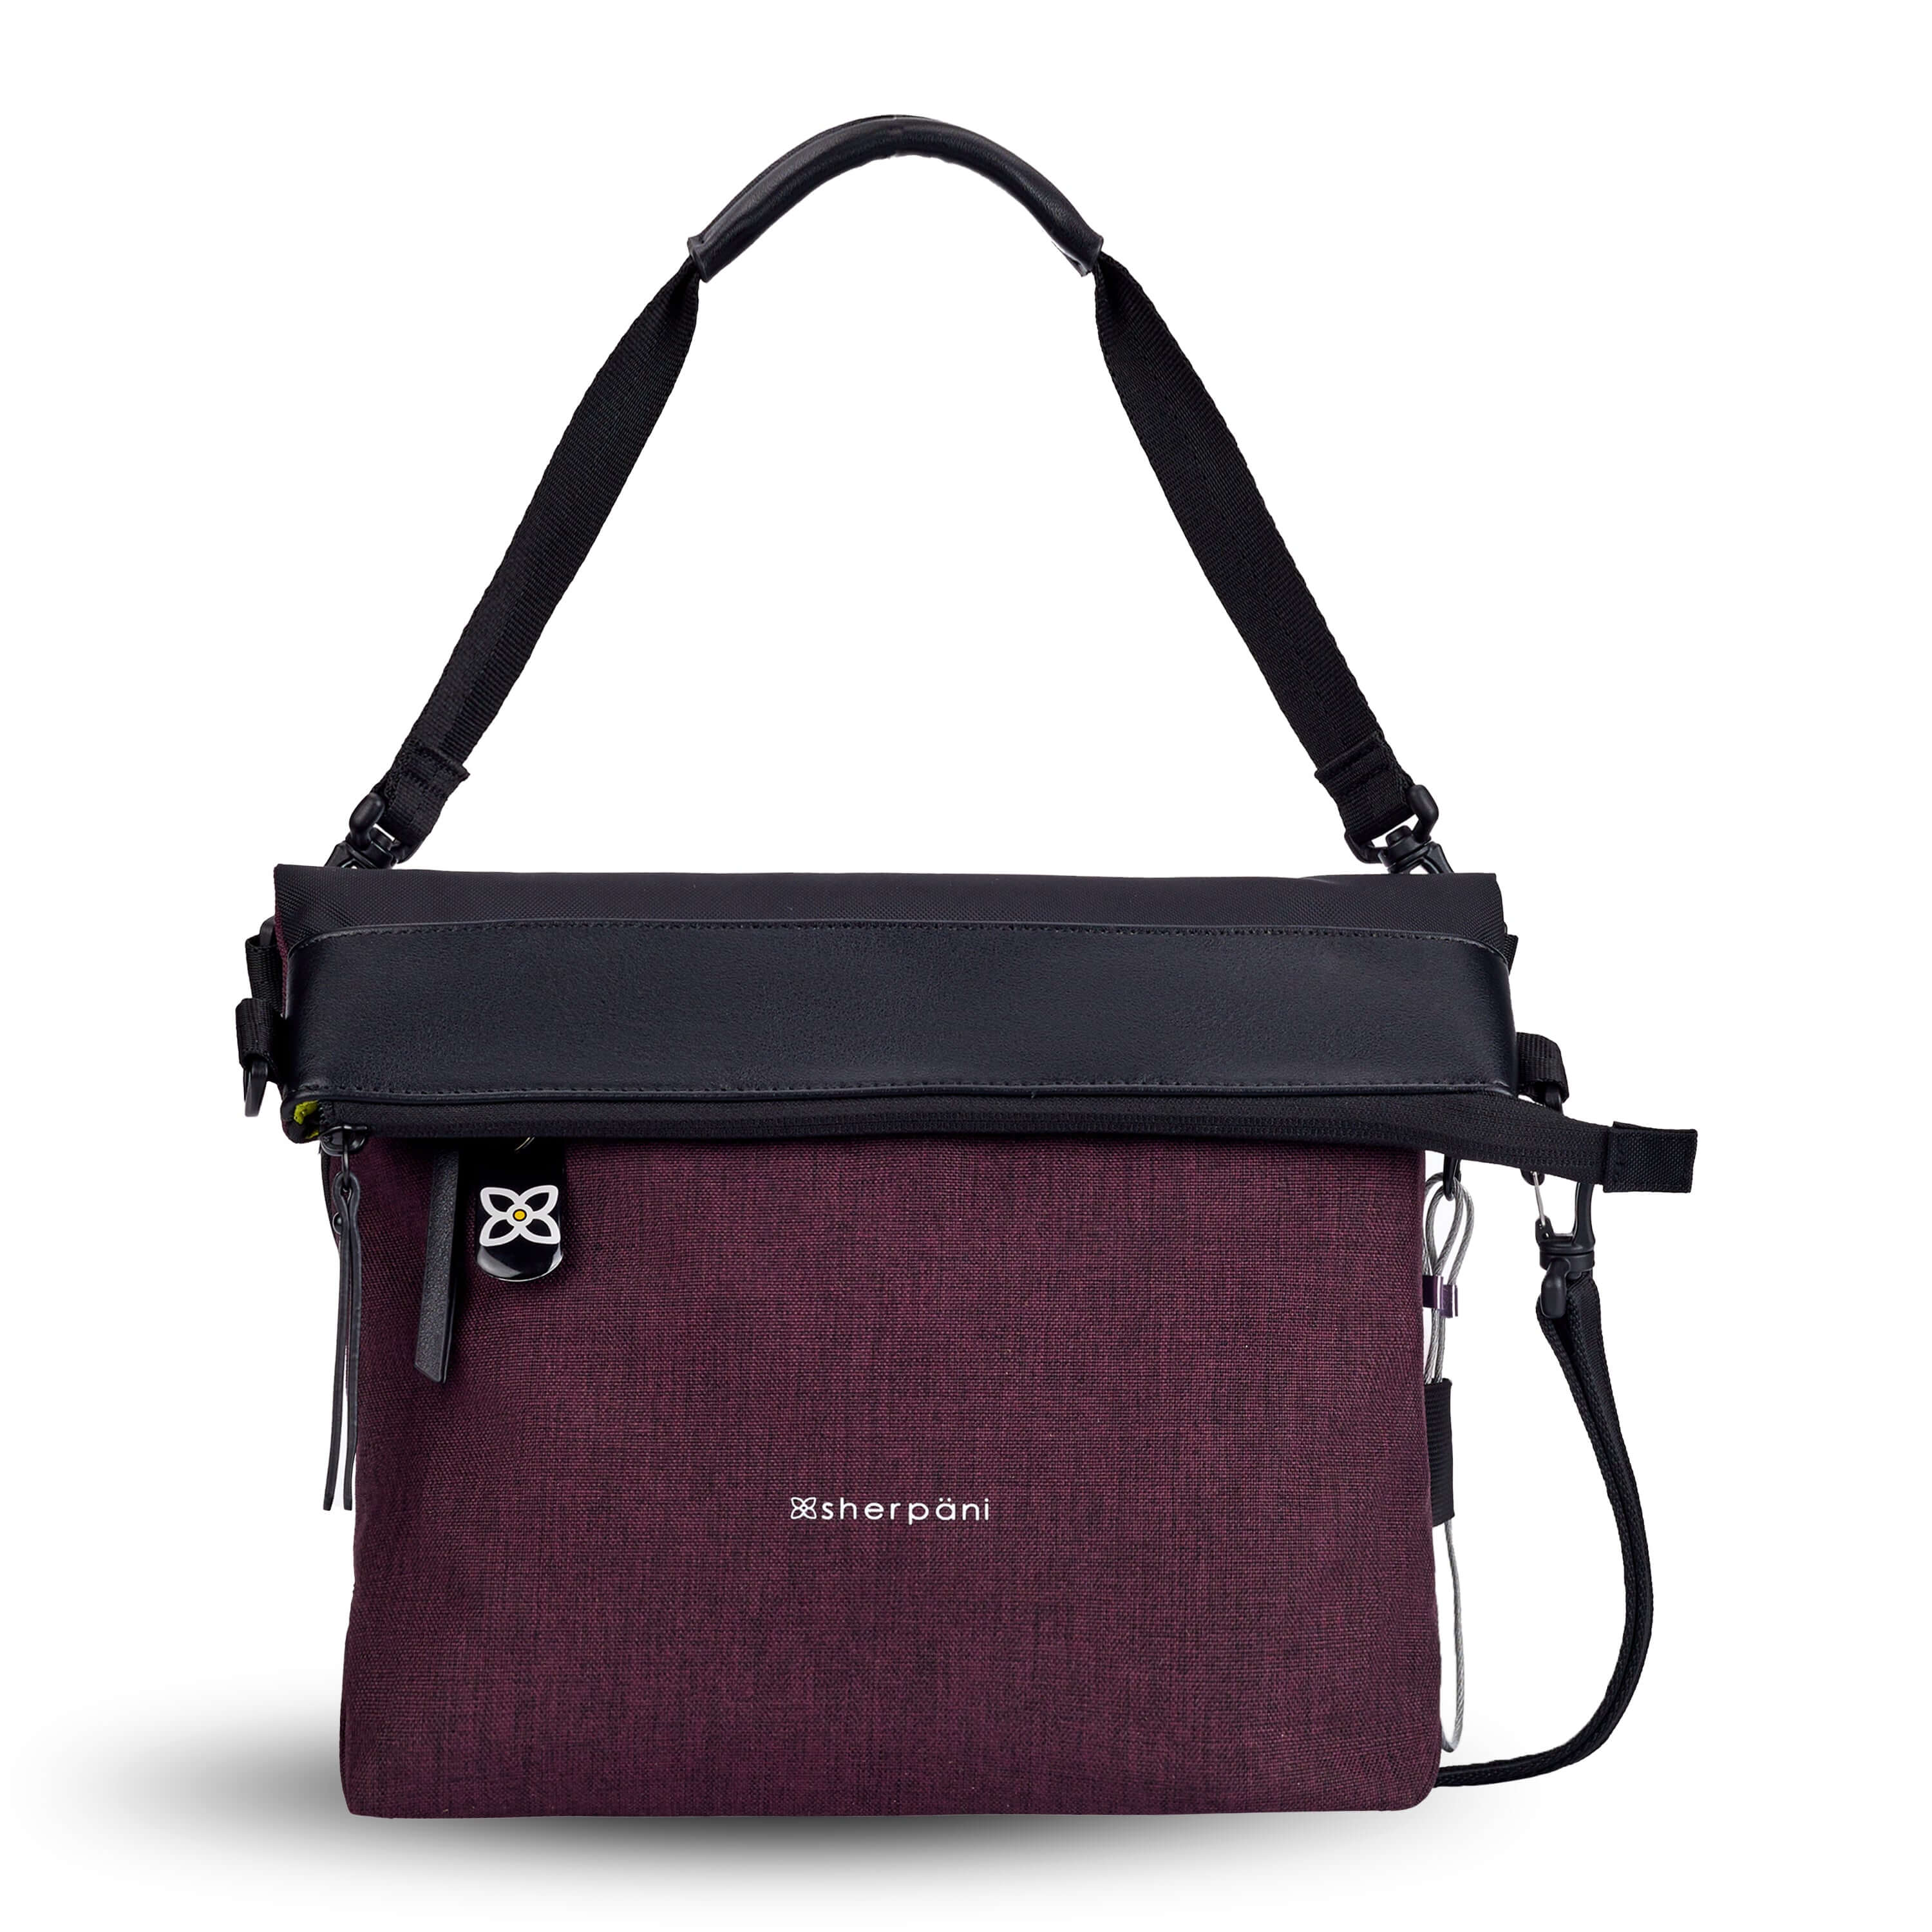 Flat front view of Sherpani's Anti-Theft bag, the Vale AT in Merlot with vegan leather accents in black. The top is folded over creating a two-toned reversible overlap. A chair loop lock is clipped onto one side, secured in place by an elastic tab. A ReturnMe tag is attached to the front zipper compartment. It has an adjustable/detachable crossbody strap, and a second detachable strap fixed at a shorter length. 